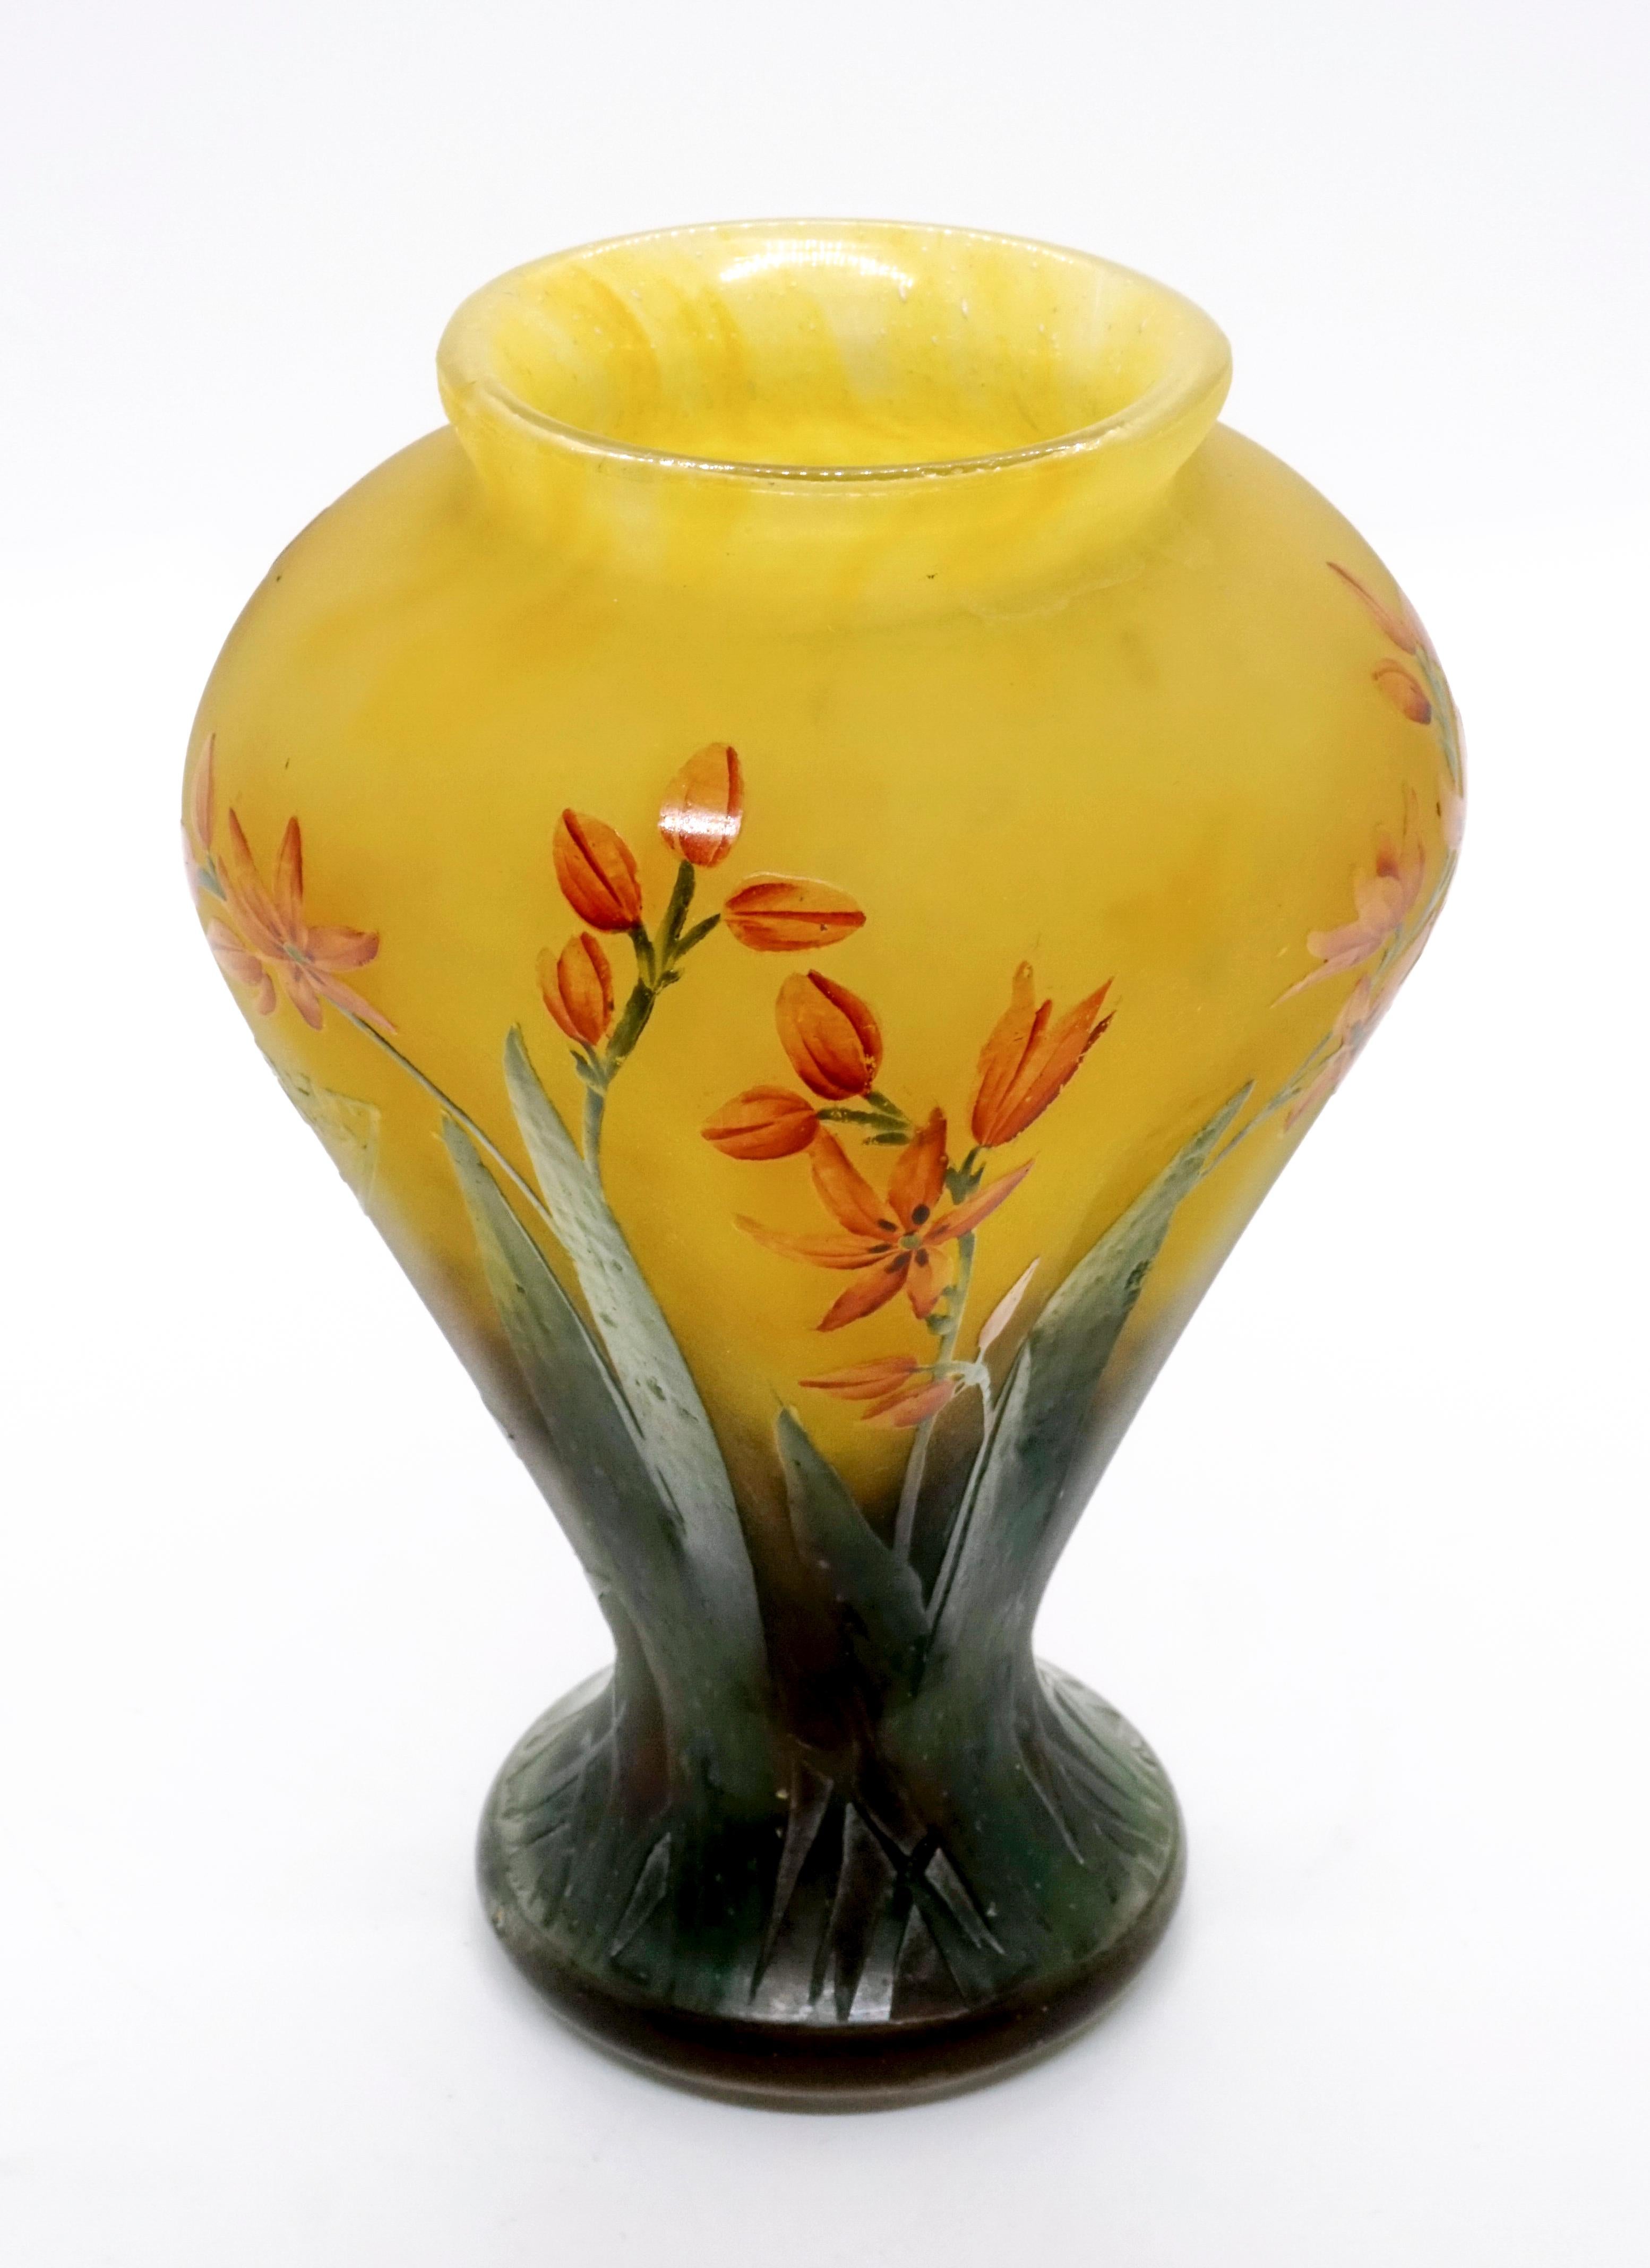 French Art Nouveau Yellow and Green Vase with Orange-Red Flowers, Daum Nancy, France